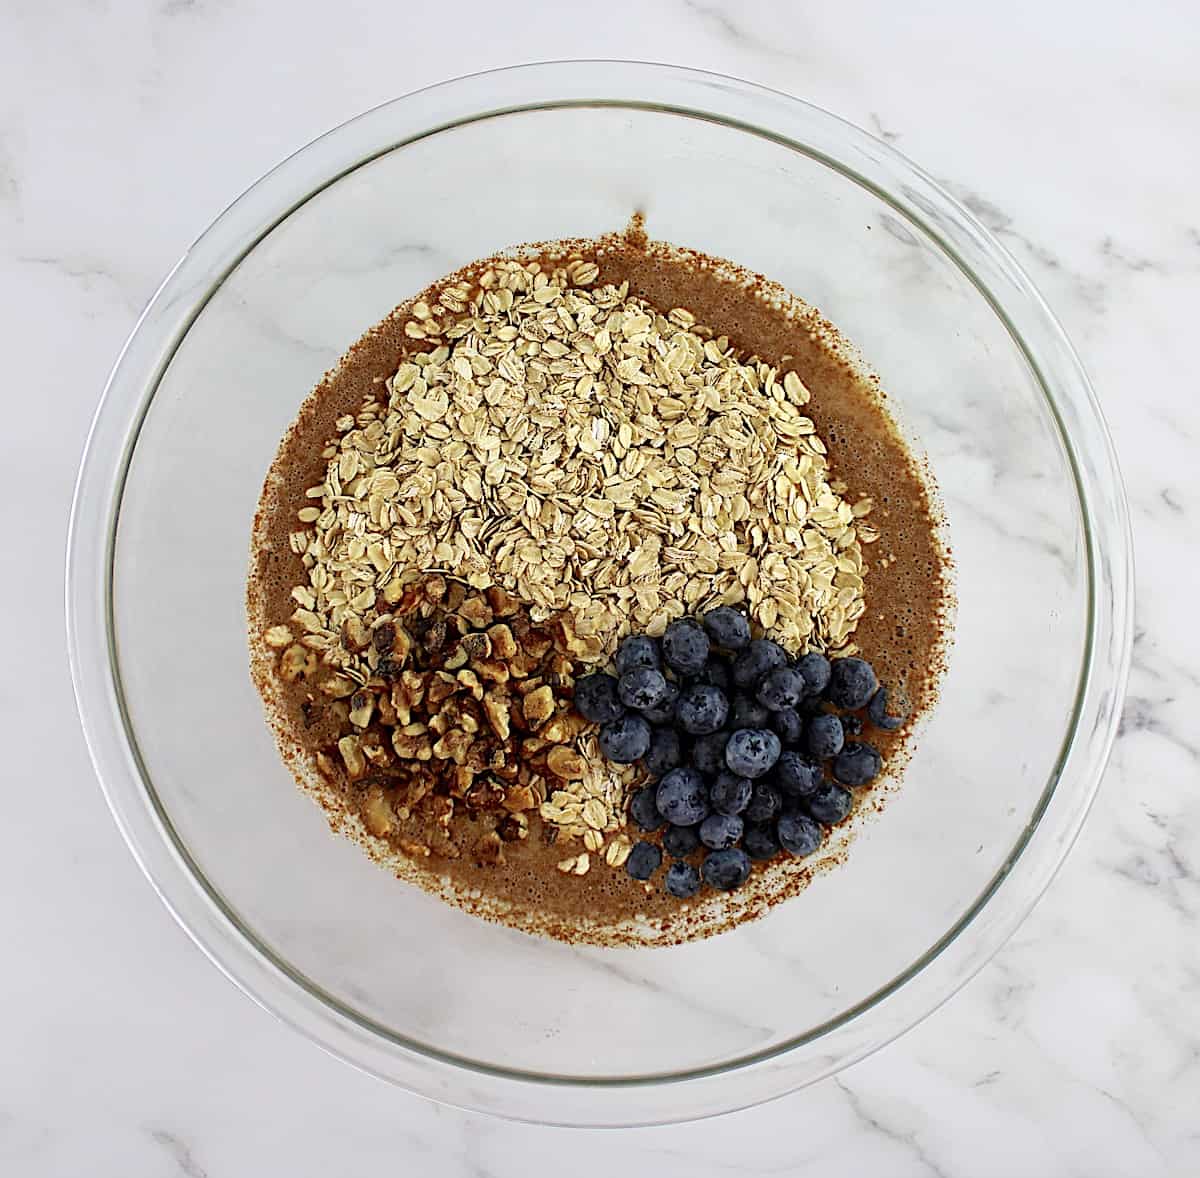 Vegan Baked Oats with blueberries and walnuts in glass bowl unmixed